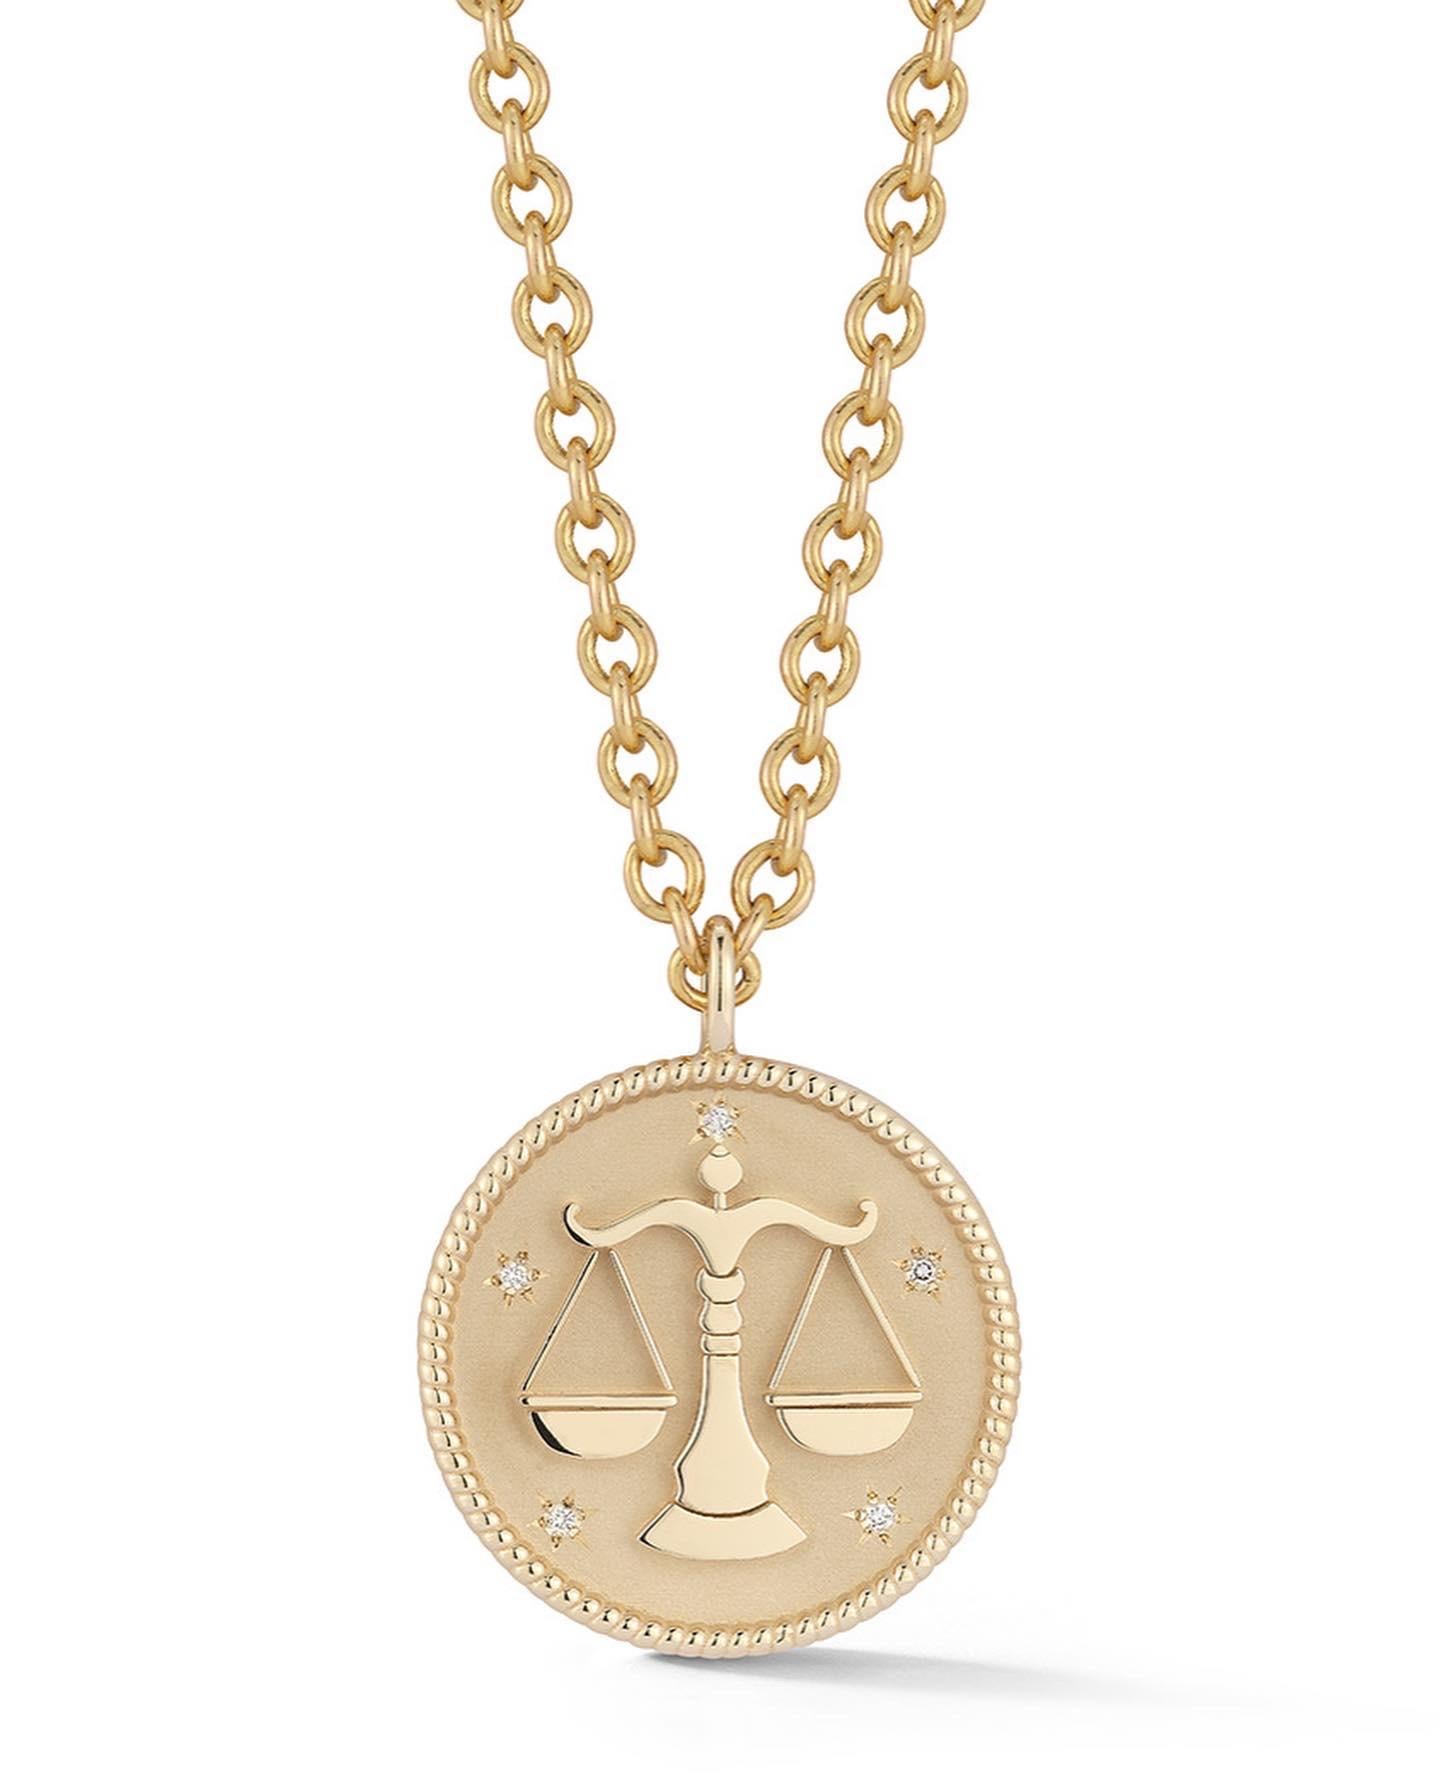 Garland Collection Diamond and Gold Aquarius Zodiac Medallion For Sale 3